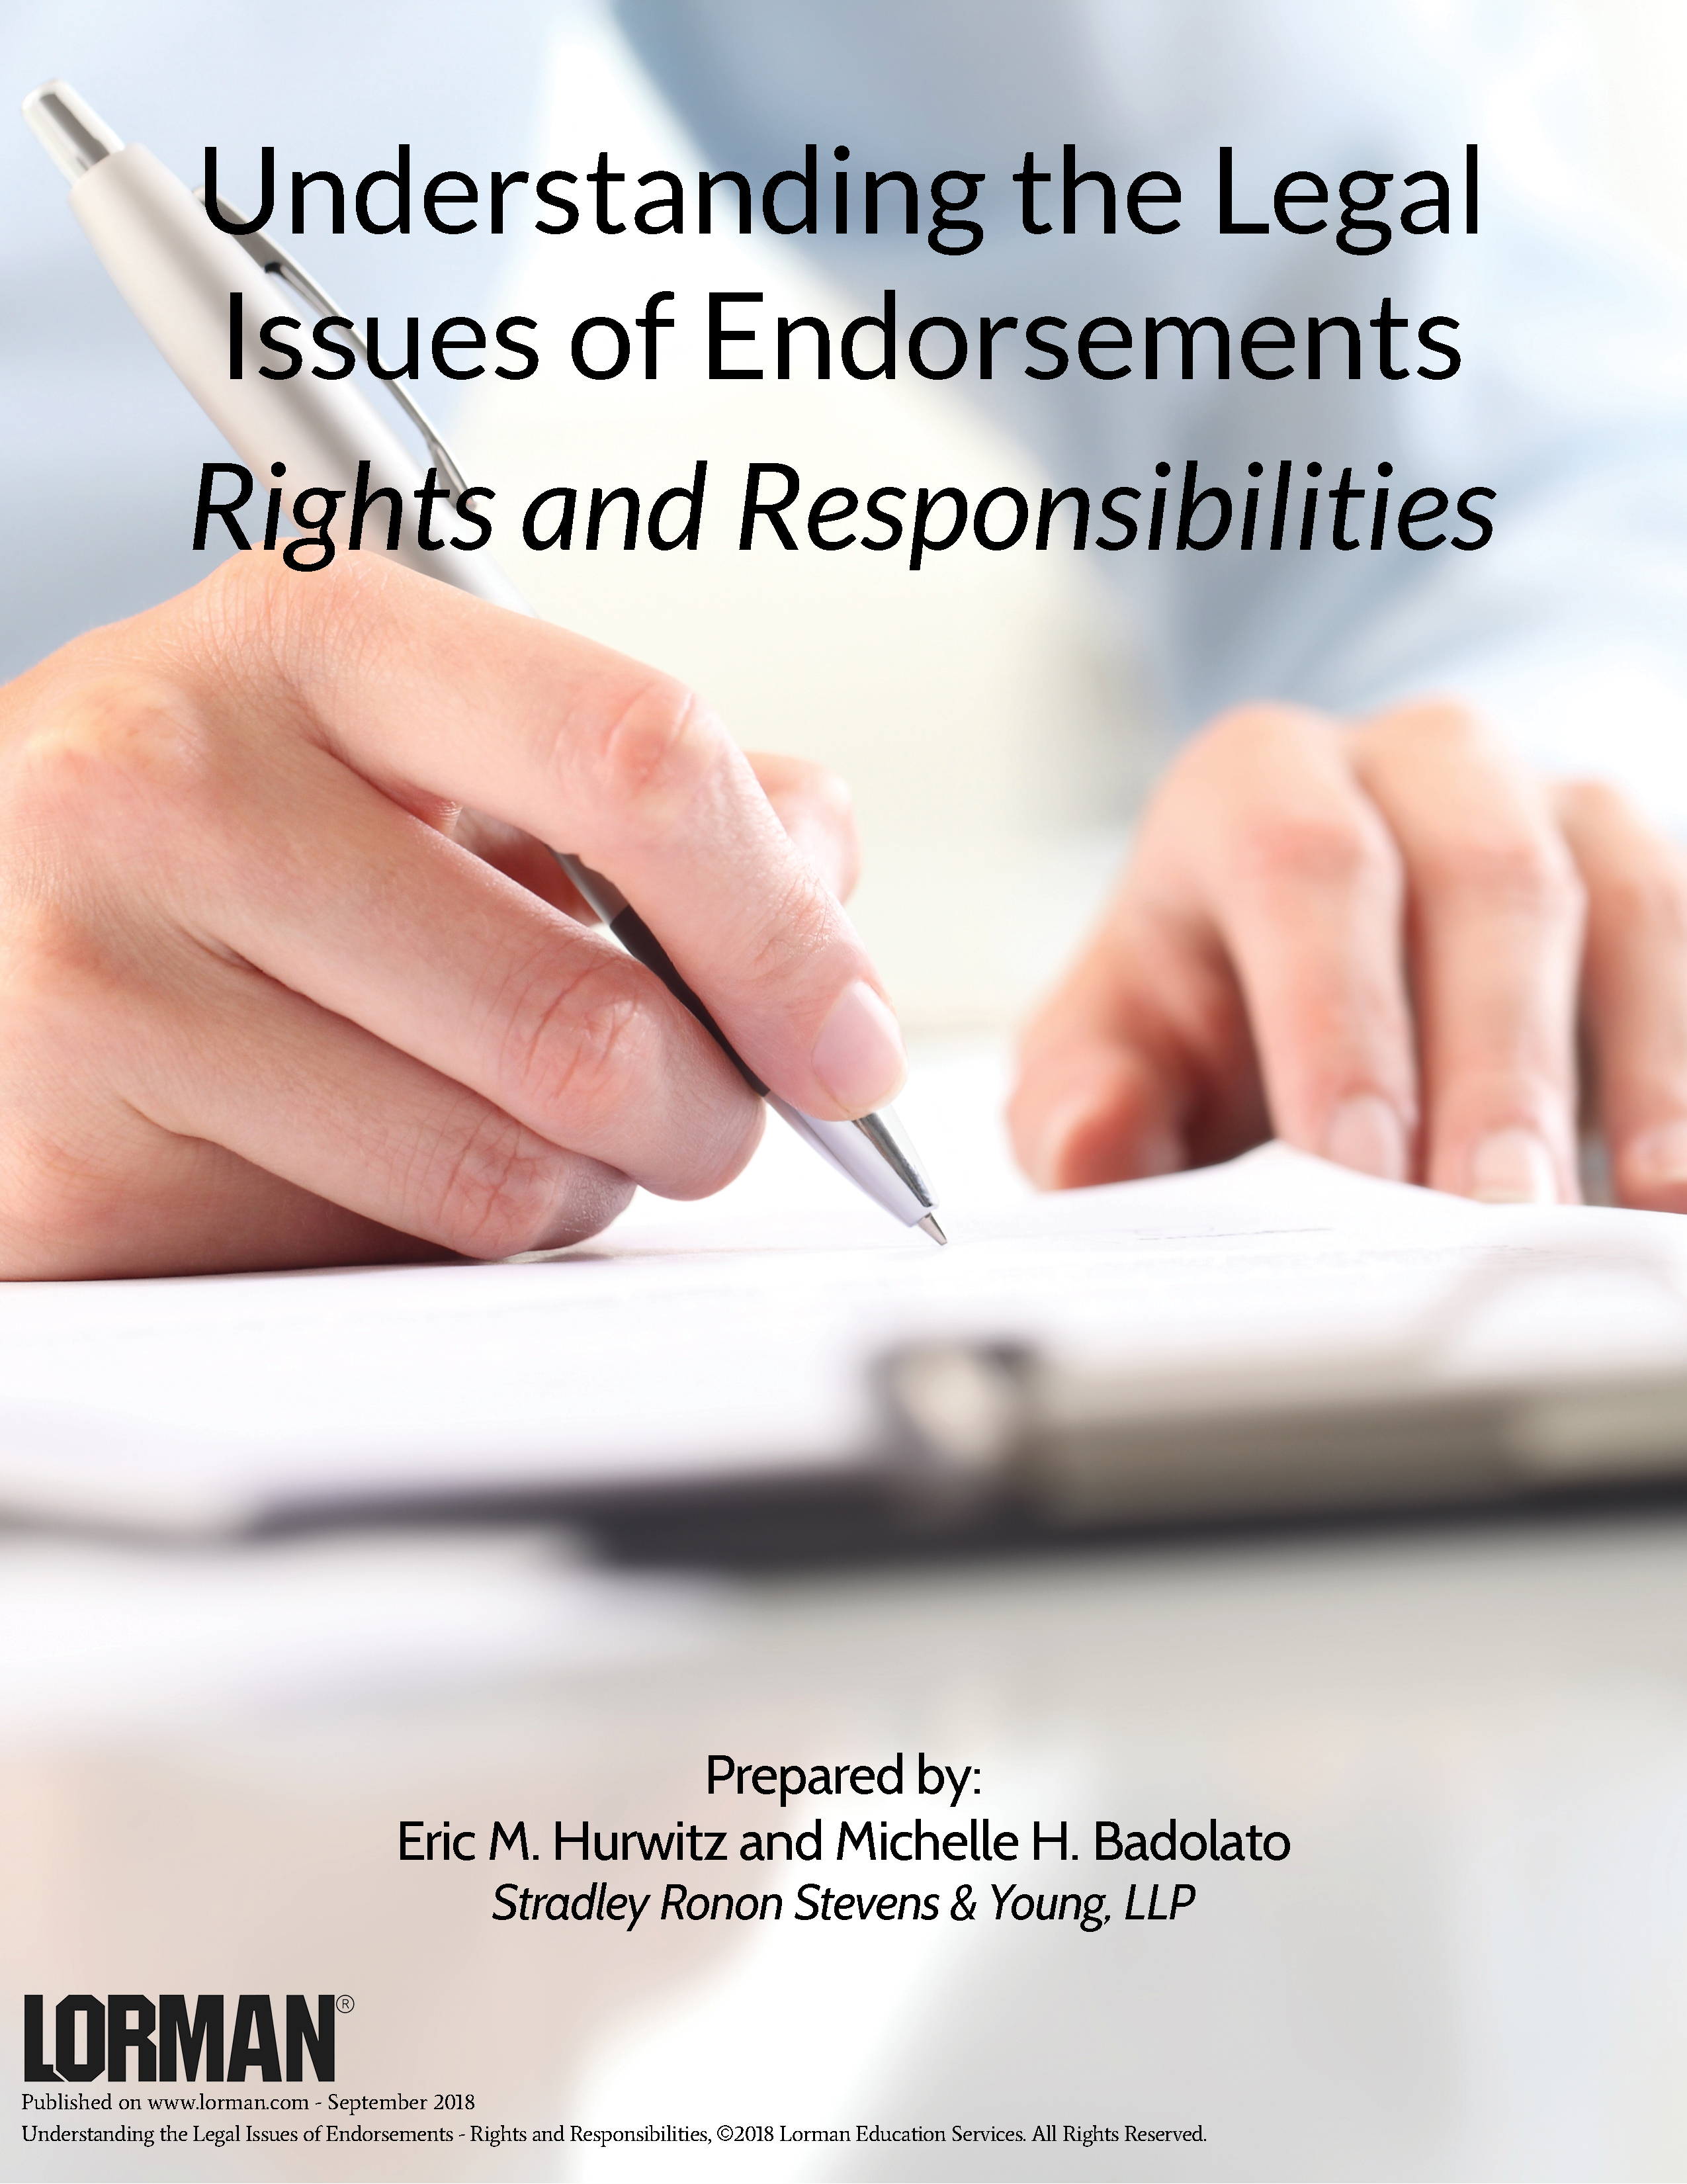 Understanding the Legal Issues of Endorsements - Rights and Responsibilities